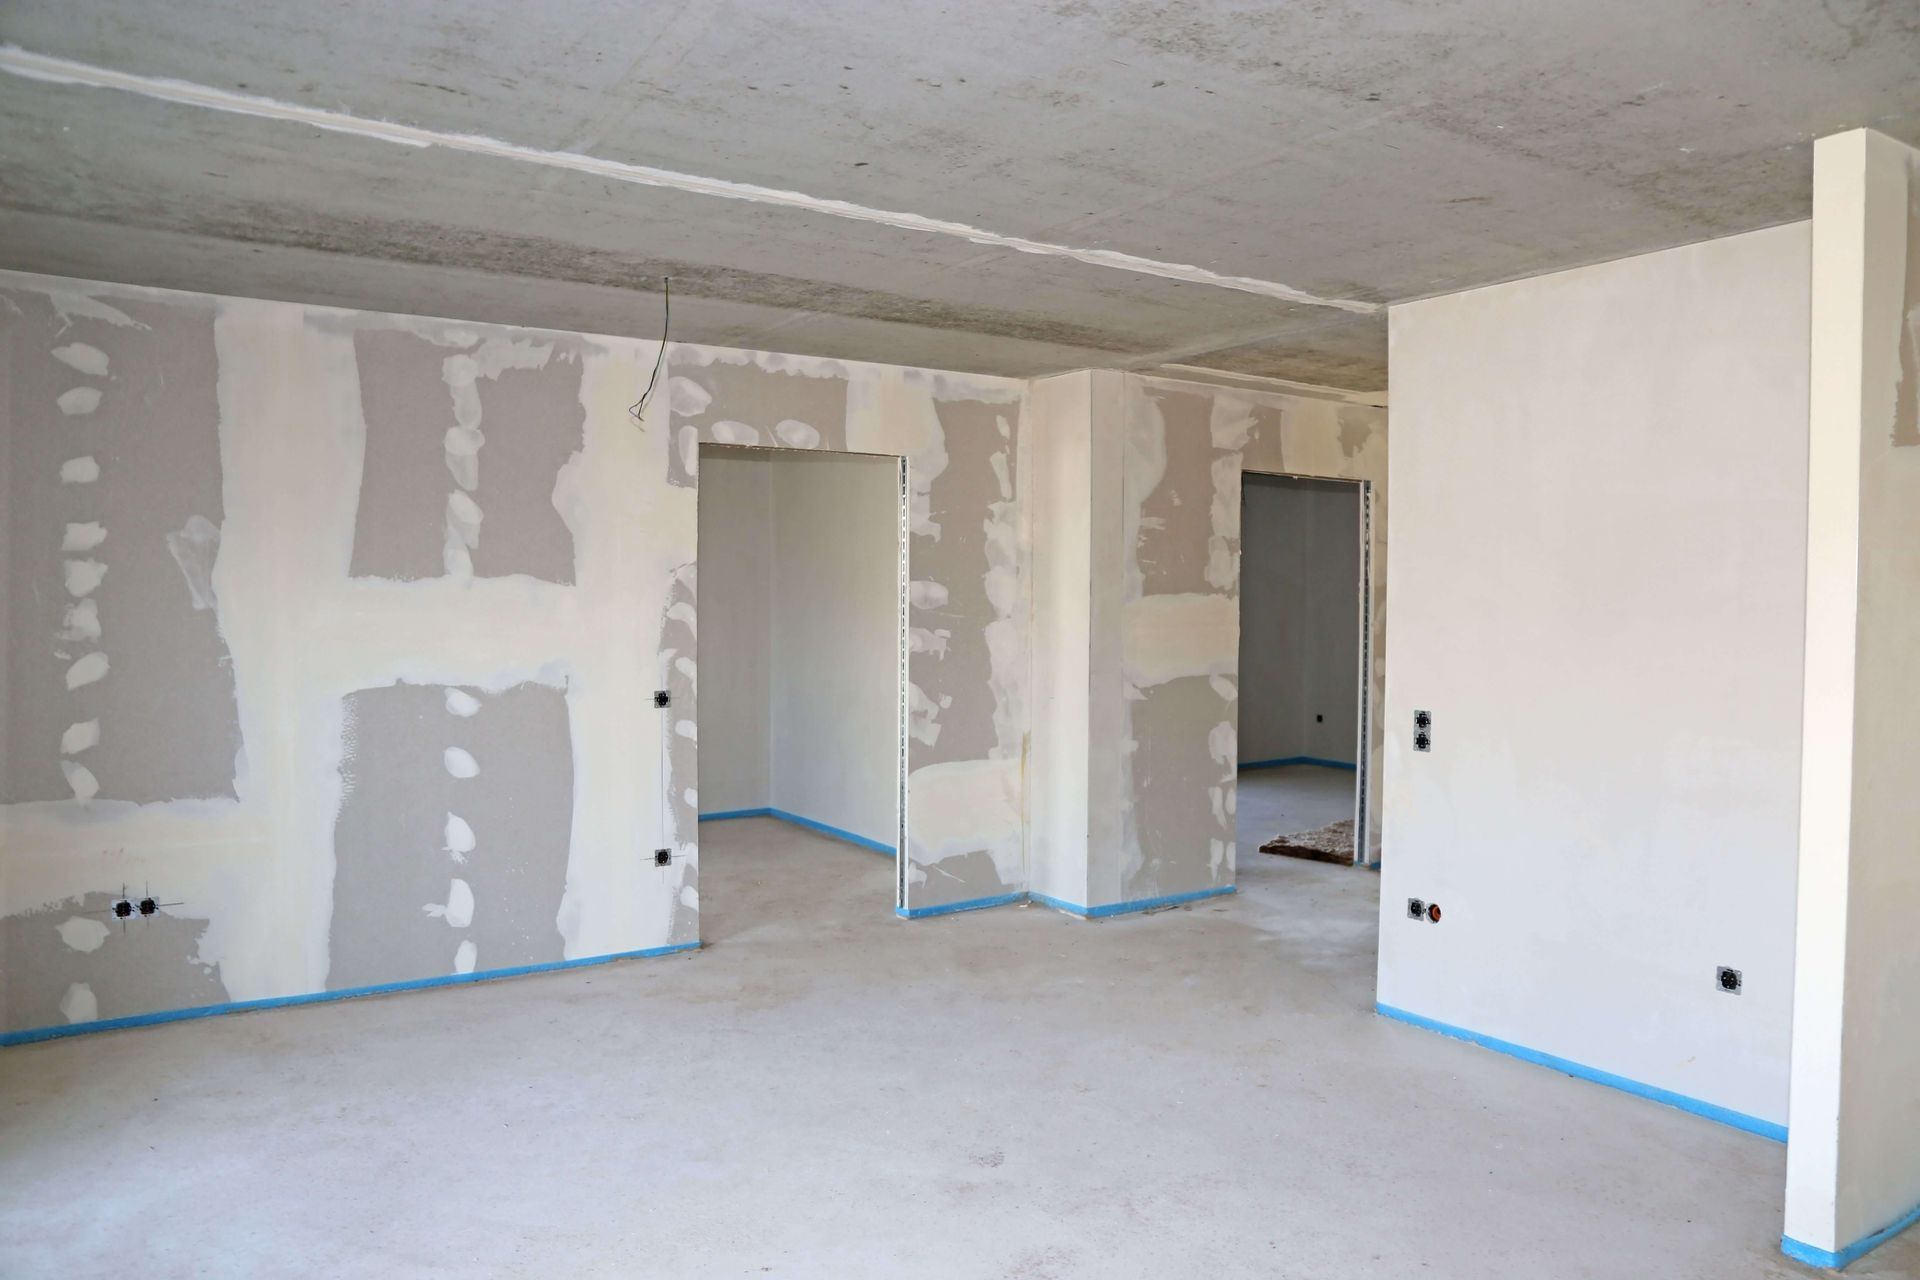 drywall patching and repair company in richmond